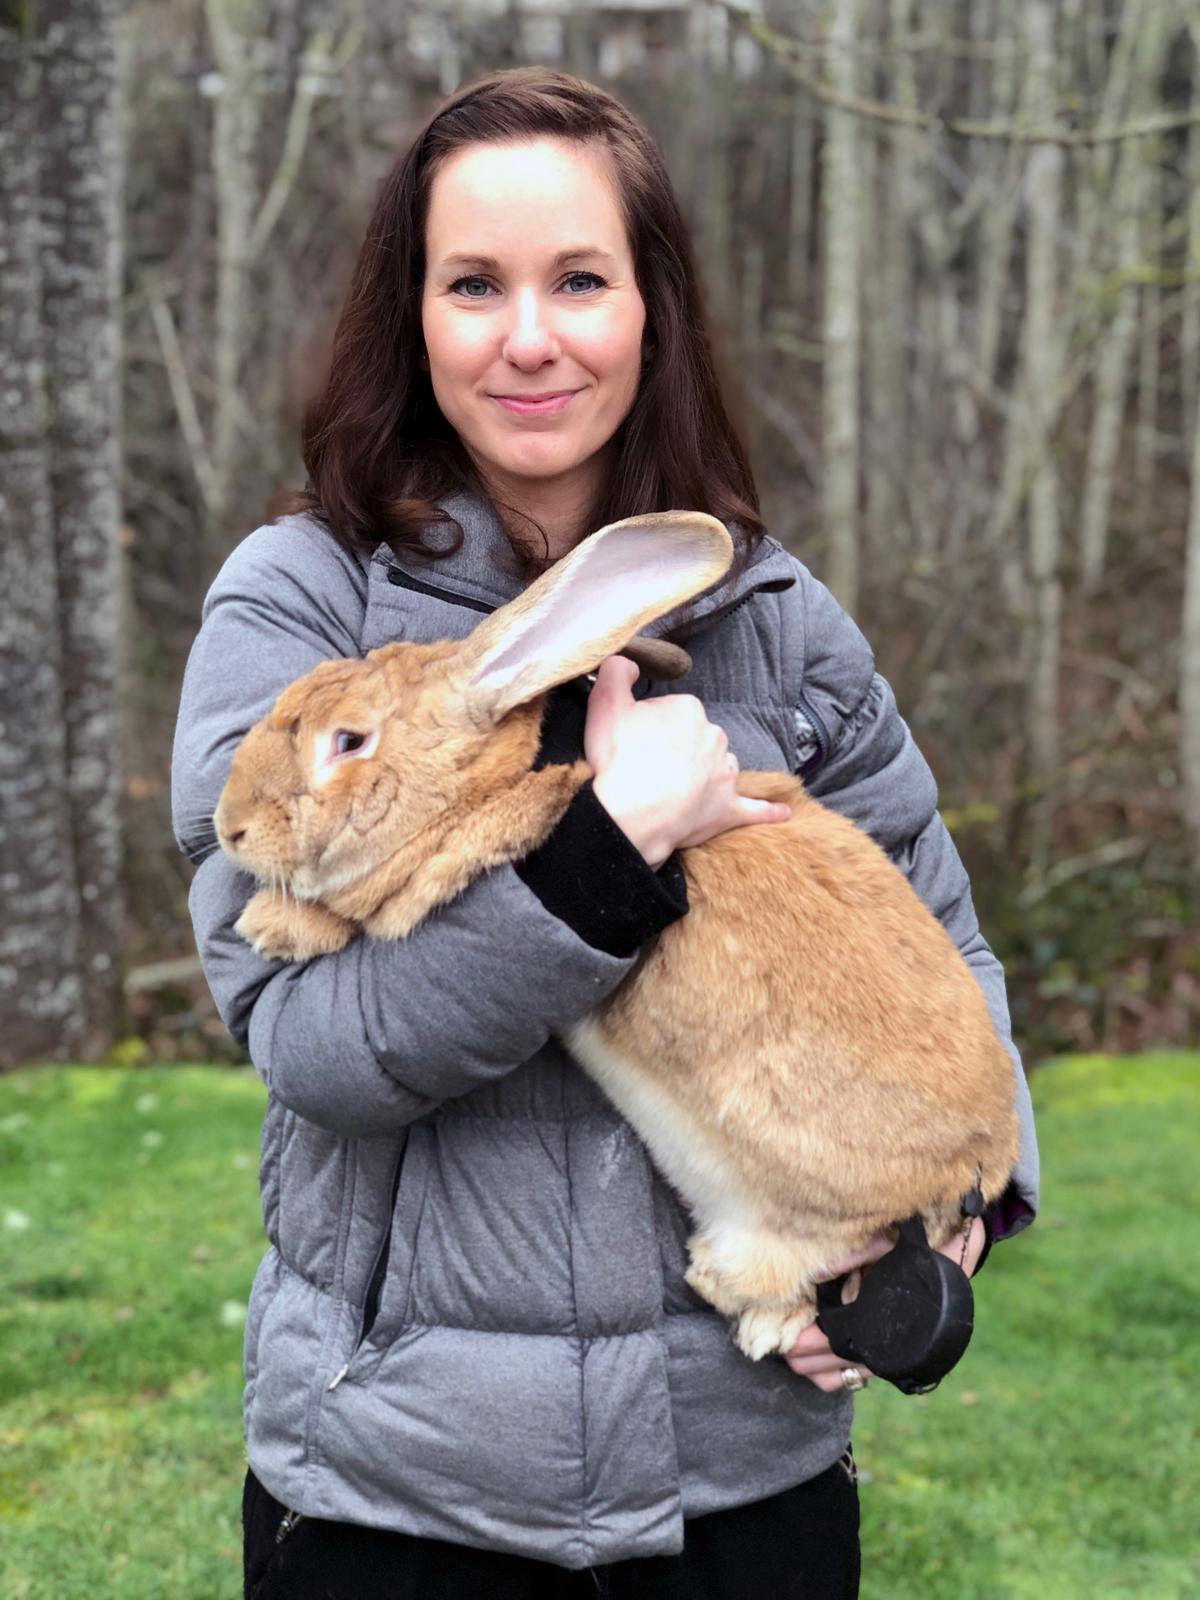 Lindsay, 35, from Seattle, Washington, with Cocoa Puff the rabbit. (Caters News)